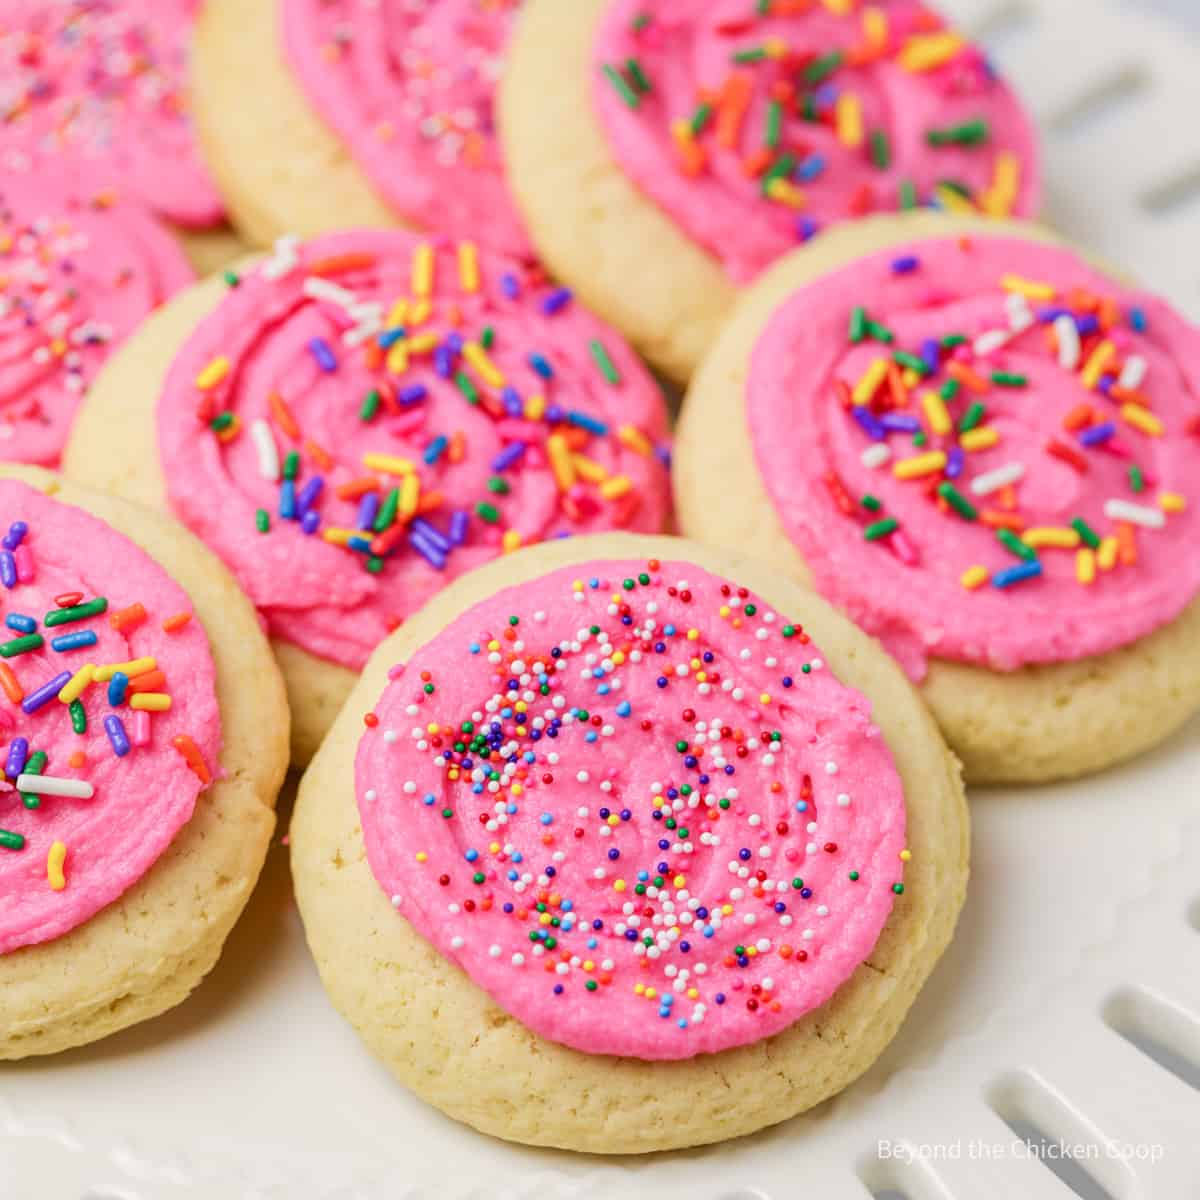 Pink frosted sugar cookies topped with sprinkles.